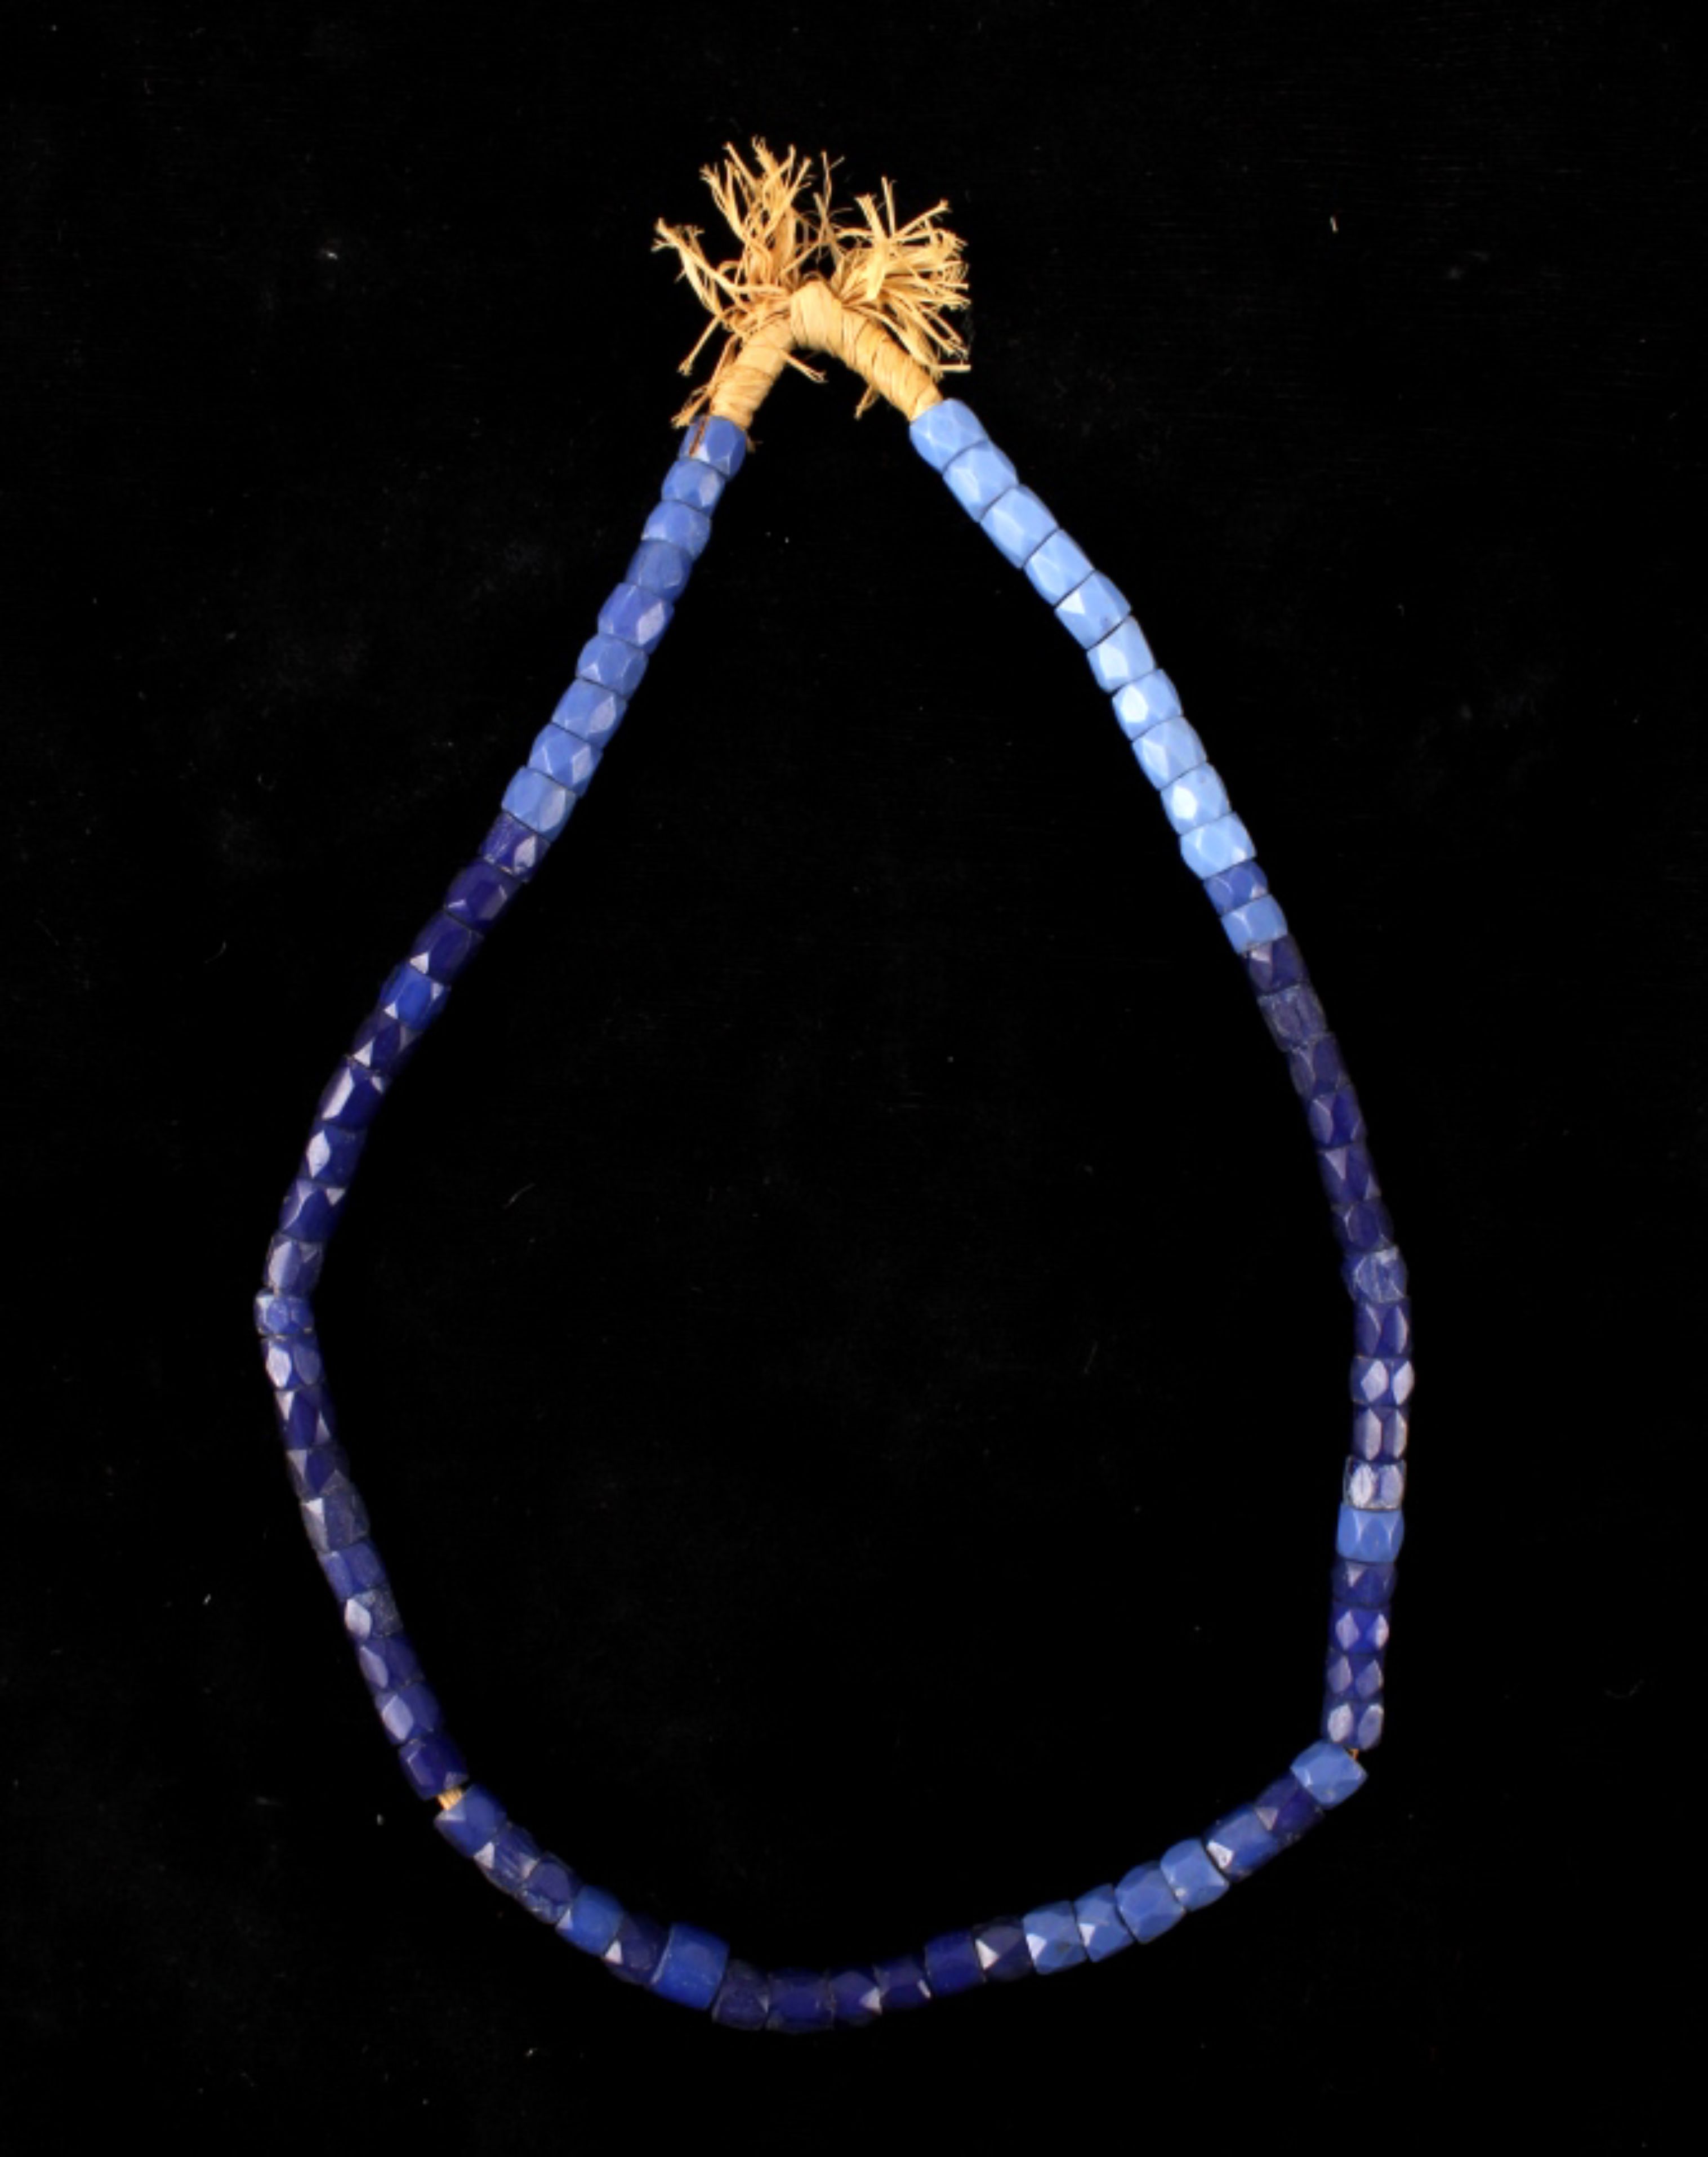 African Cobalt Glass Trade Bead Necklaces - Image 11 of 17